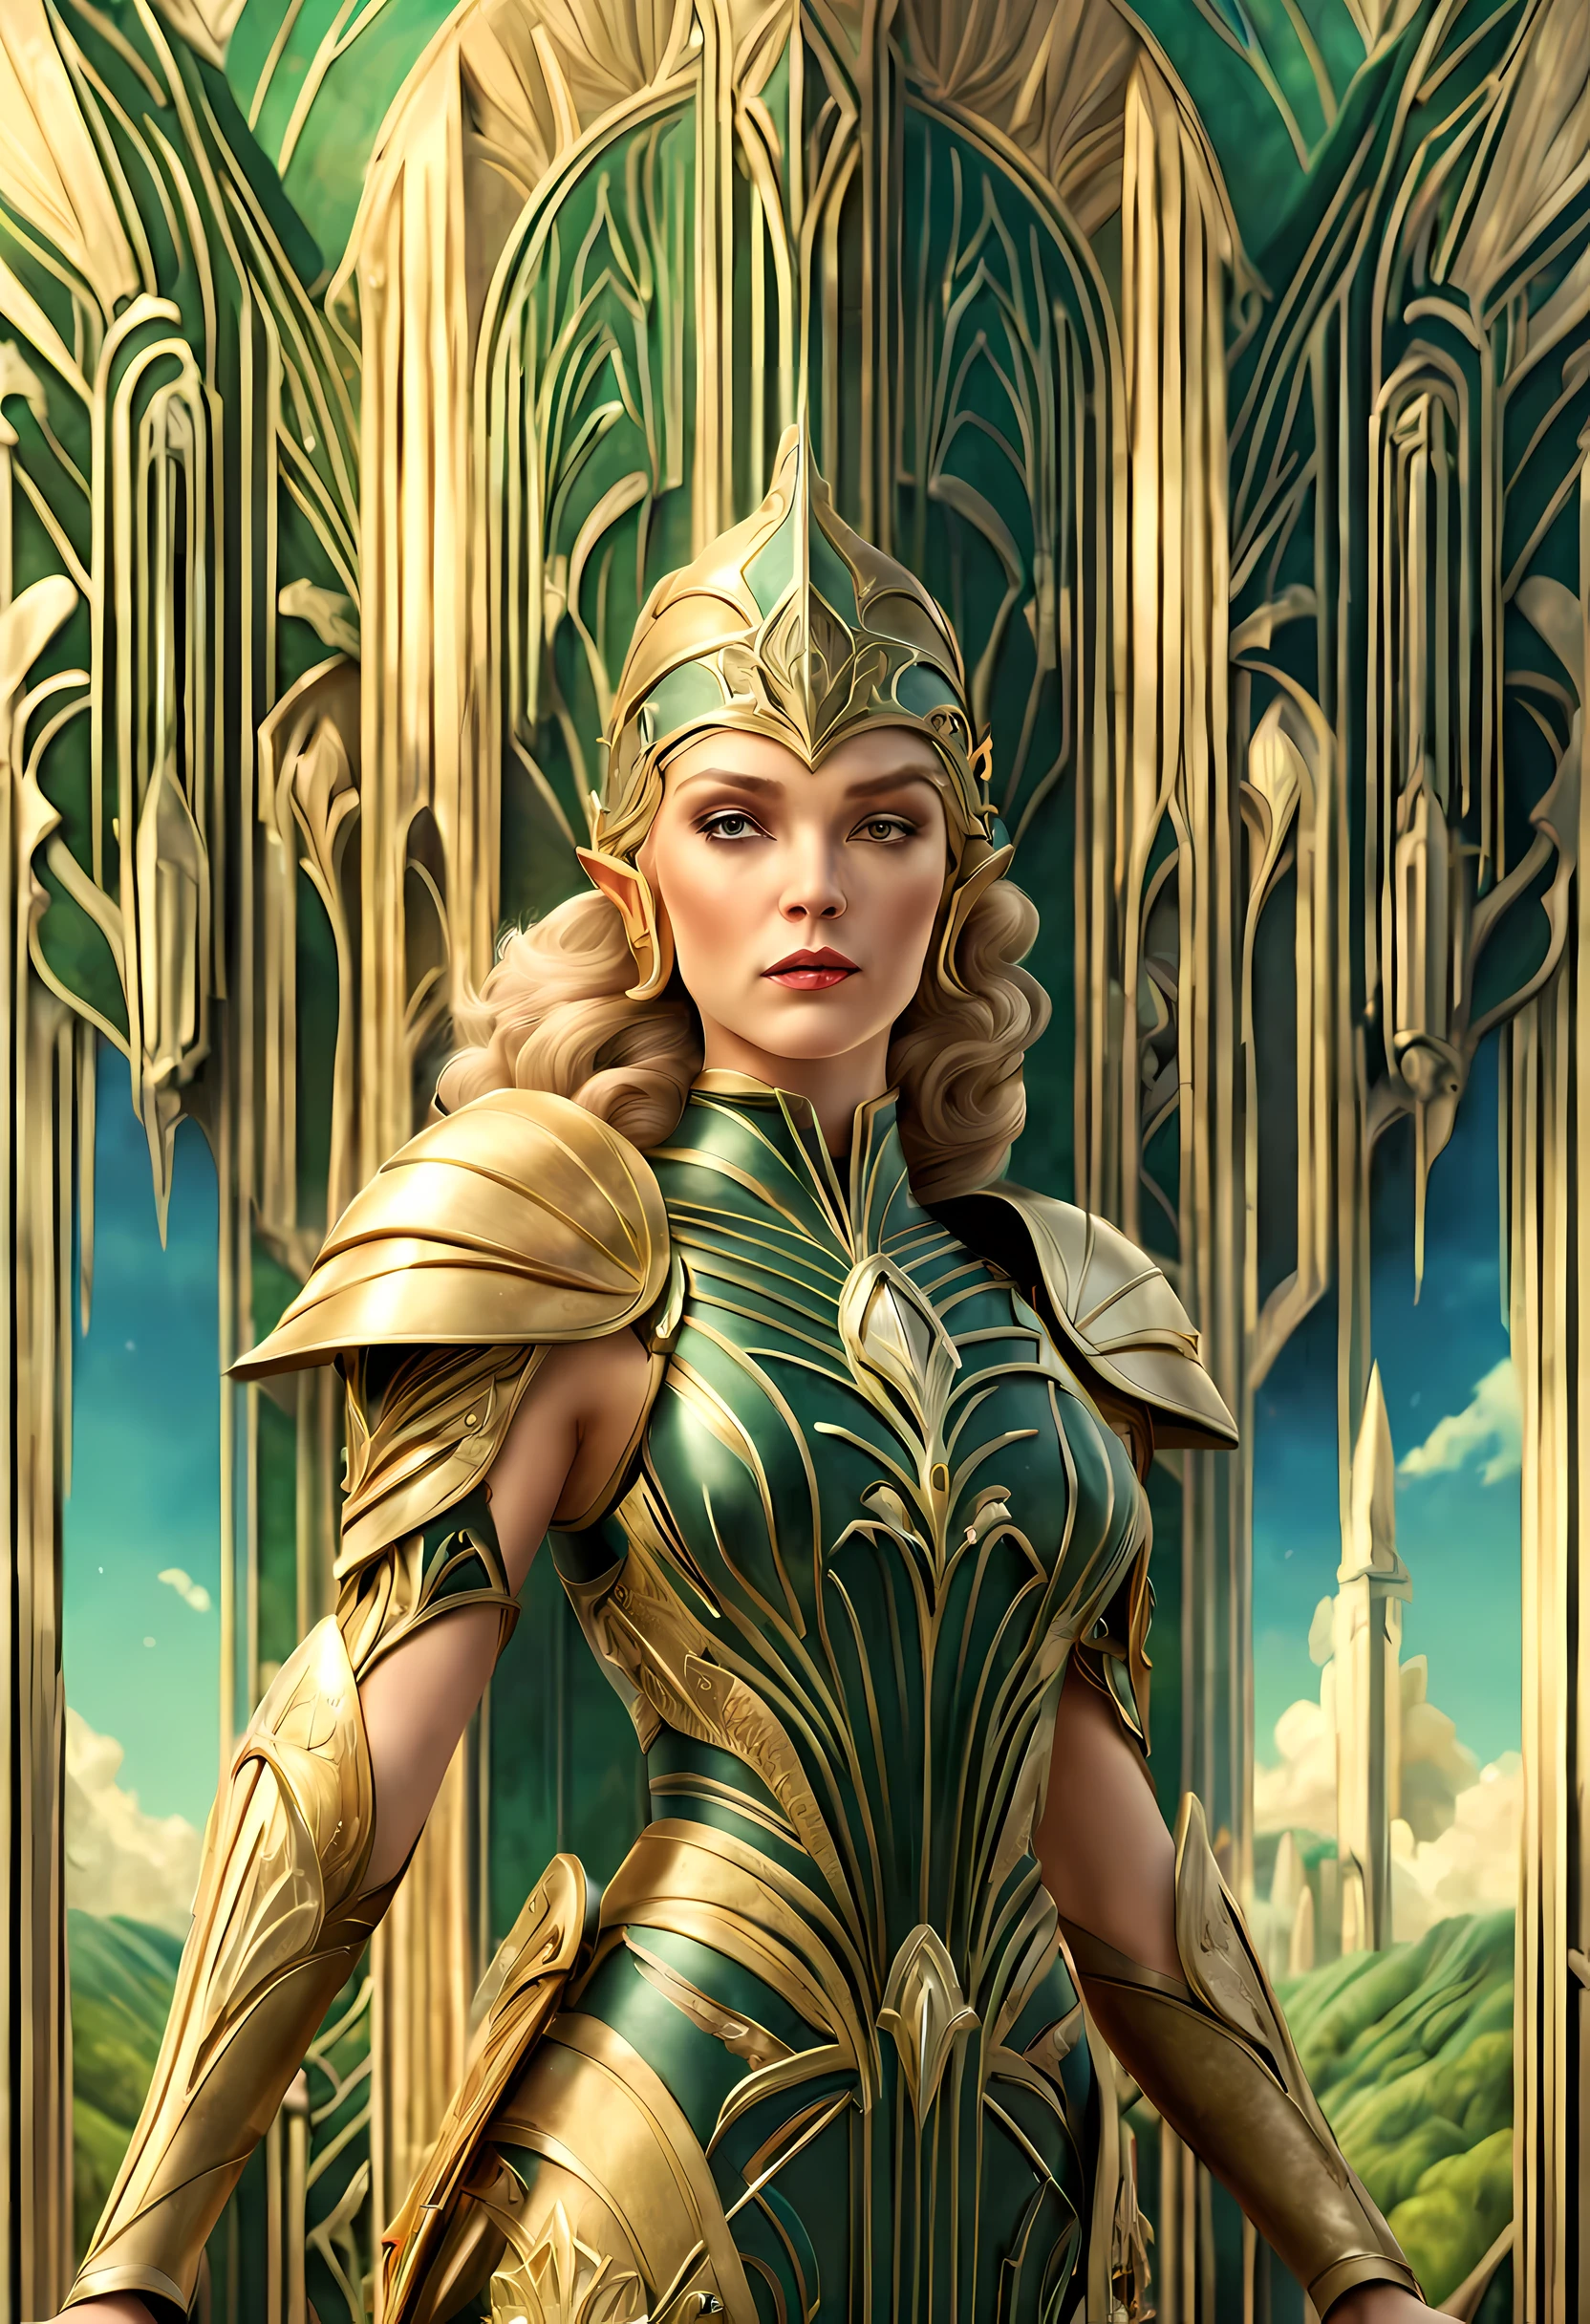 (art deco: 1.5) fantasy art deco, high details, best quality, 16k, [ultra detailed], masterpiece, best quality, (extremely detailed), full body, ultra wide shot, photorealistic, fantasy_world, fantasy art, dnd art, rpg art, realistic art, a wide angle, (((anatomically correct))) a wallpaper of an elf knight, elf warrior, princess knight, shinning knight, ready for battle with her mount (intense details, Masterpiece, best quality: 1.5), female elf (intense details, Masterpiece, best quality: 1.5), ultra detailed face, ultra feminine, fair skin, exquisite beauty, gold hair, long hair, wavy hair, small pointed ears, dynamic eyes color, wearing heavy mech armor, shinning metal, armed with elven sword fantasysword sword, standing near her mount, dynamic mount , green meadows, blue skies background and some clouds background depth of field (intricate details, Masterpiece, best quality: 1.5), full body (intricate details, Masterpiece, best quality: 1.5), high details, best quality, highres, ultra wide angle